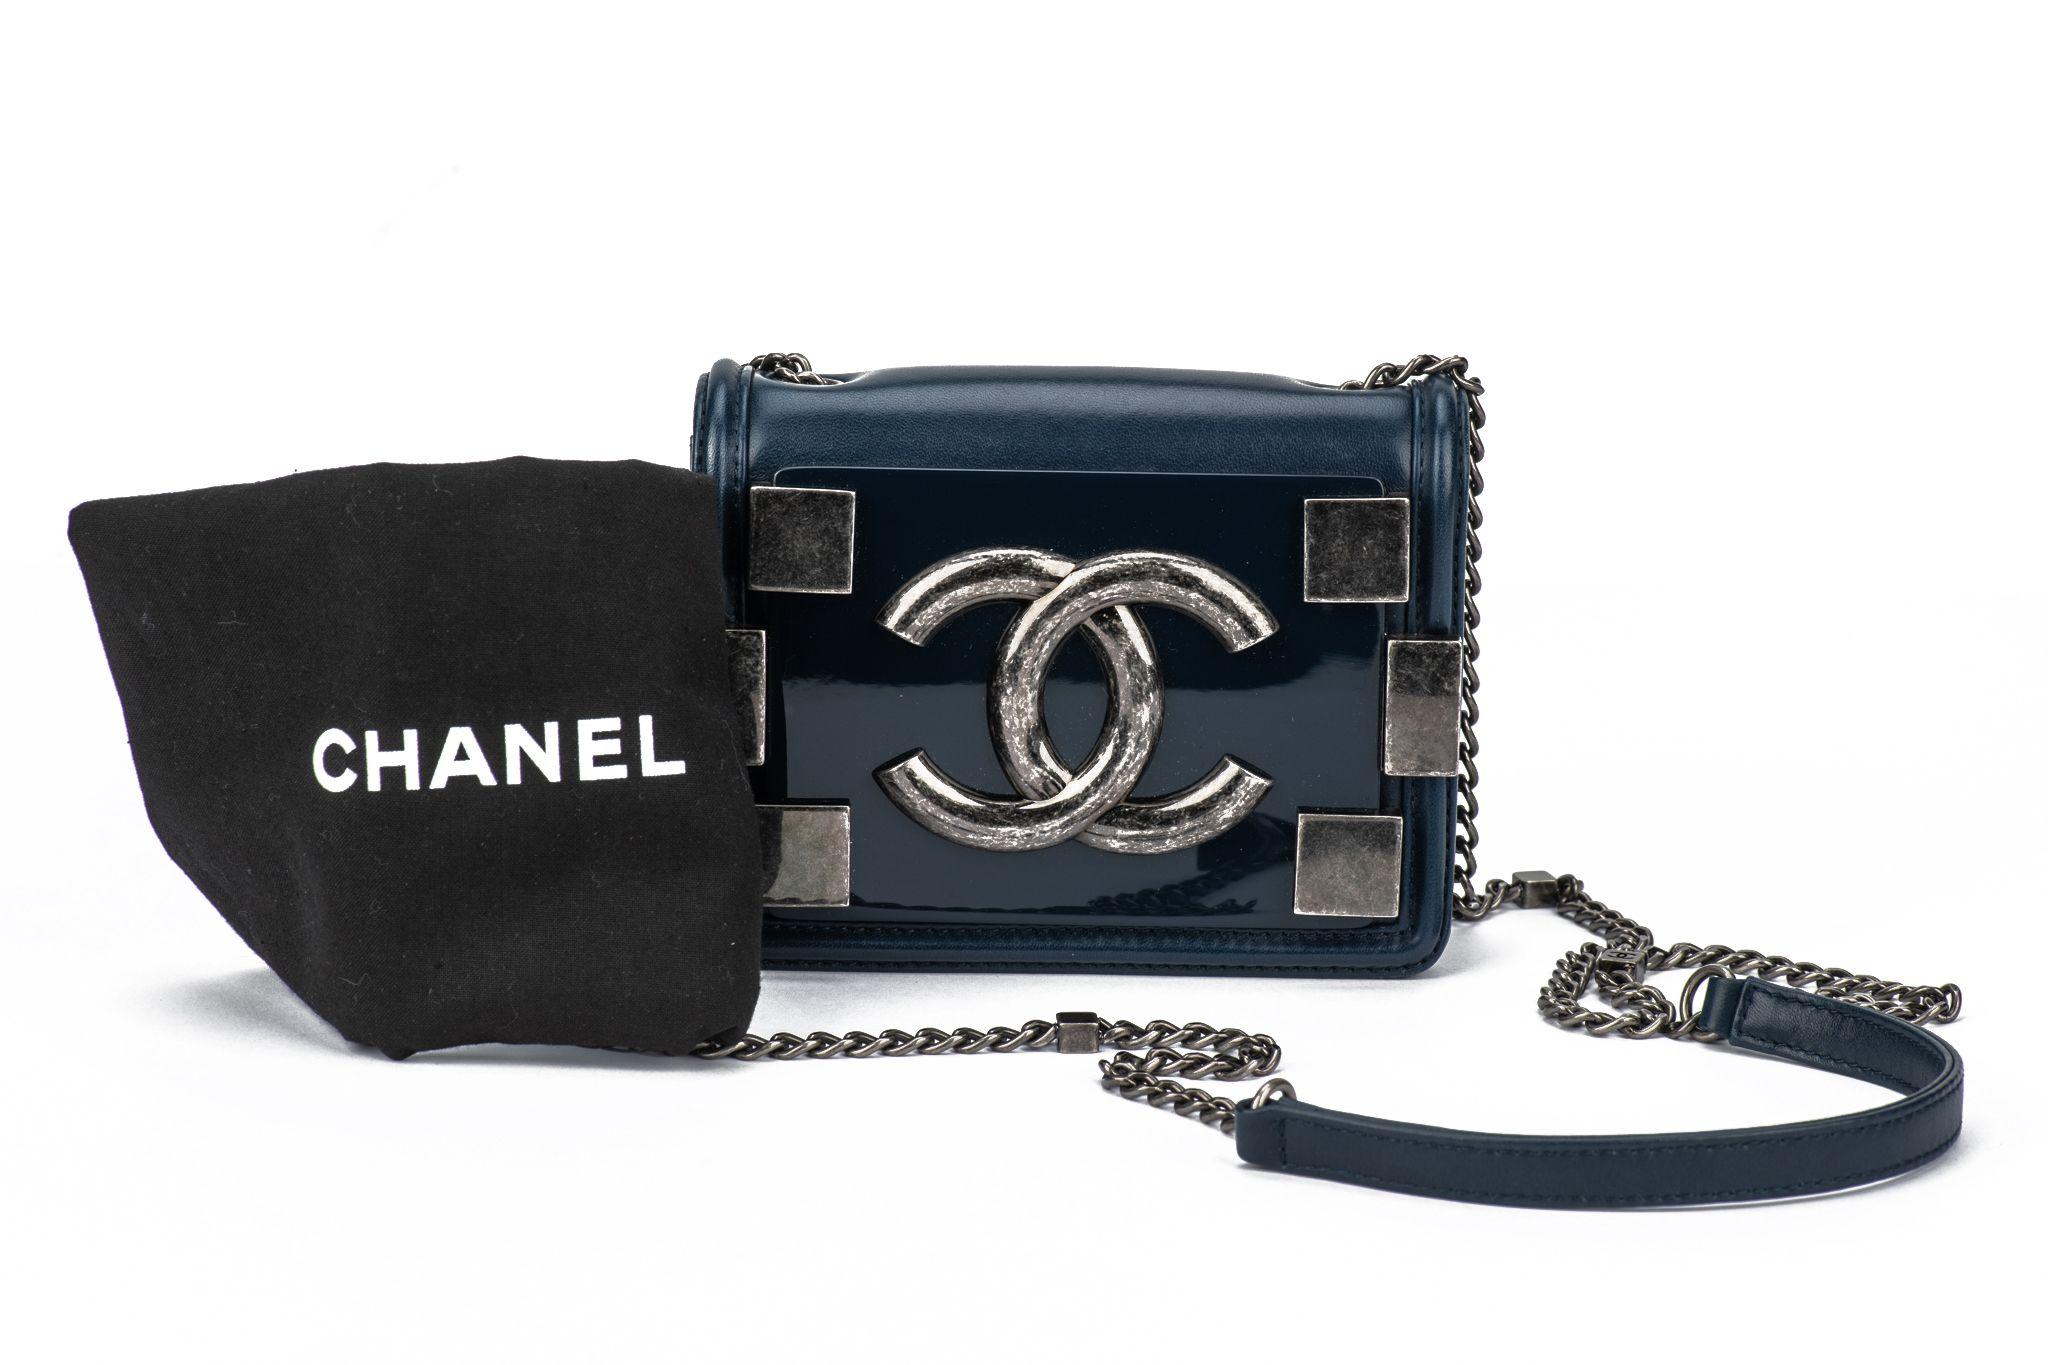 Chanel Pink Quilted Patent Leather Large Boy Bag Ruthenium Hardware, 2012-2013 (Very Good)